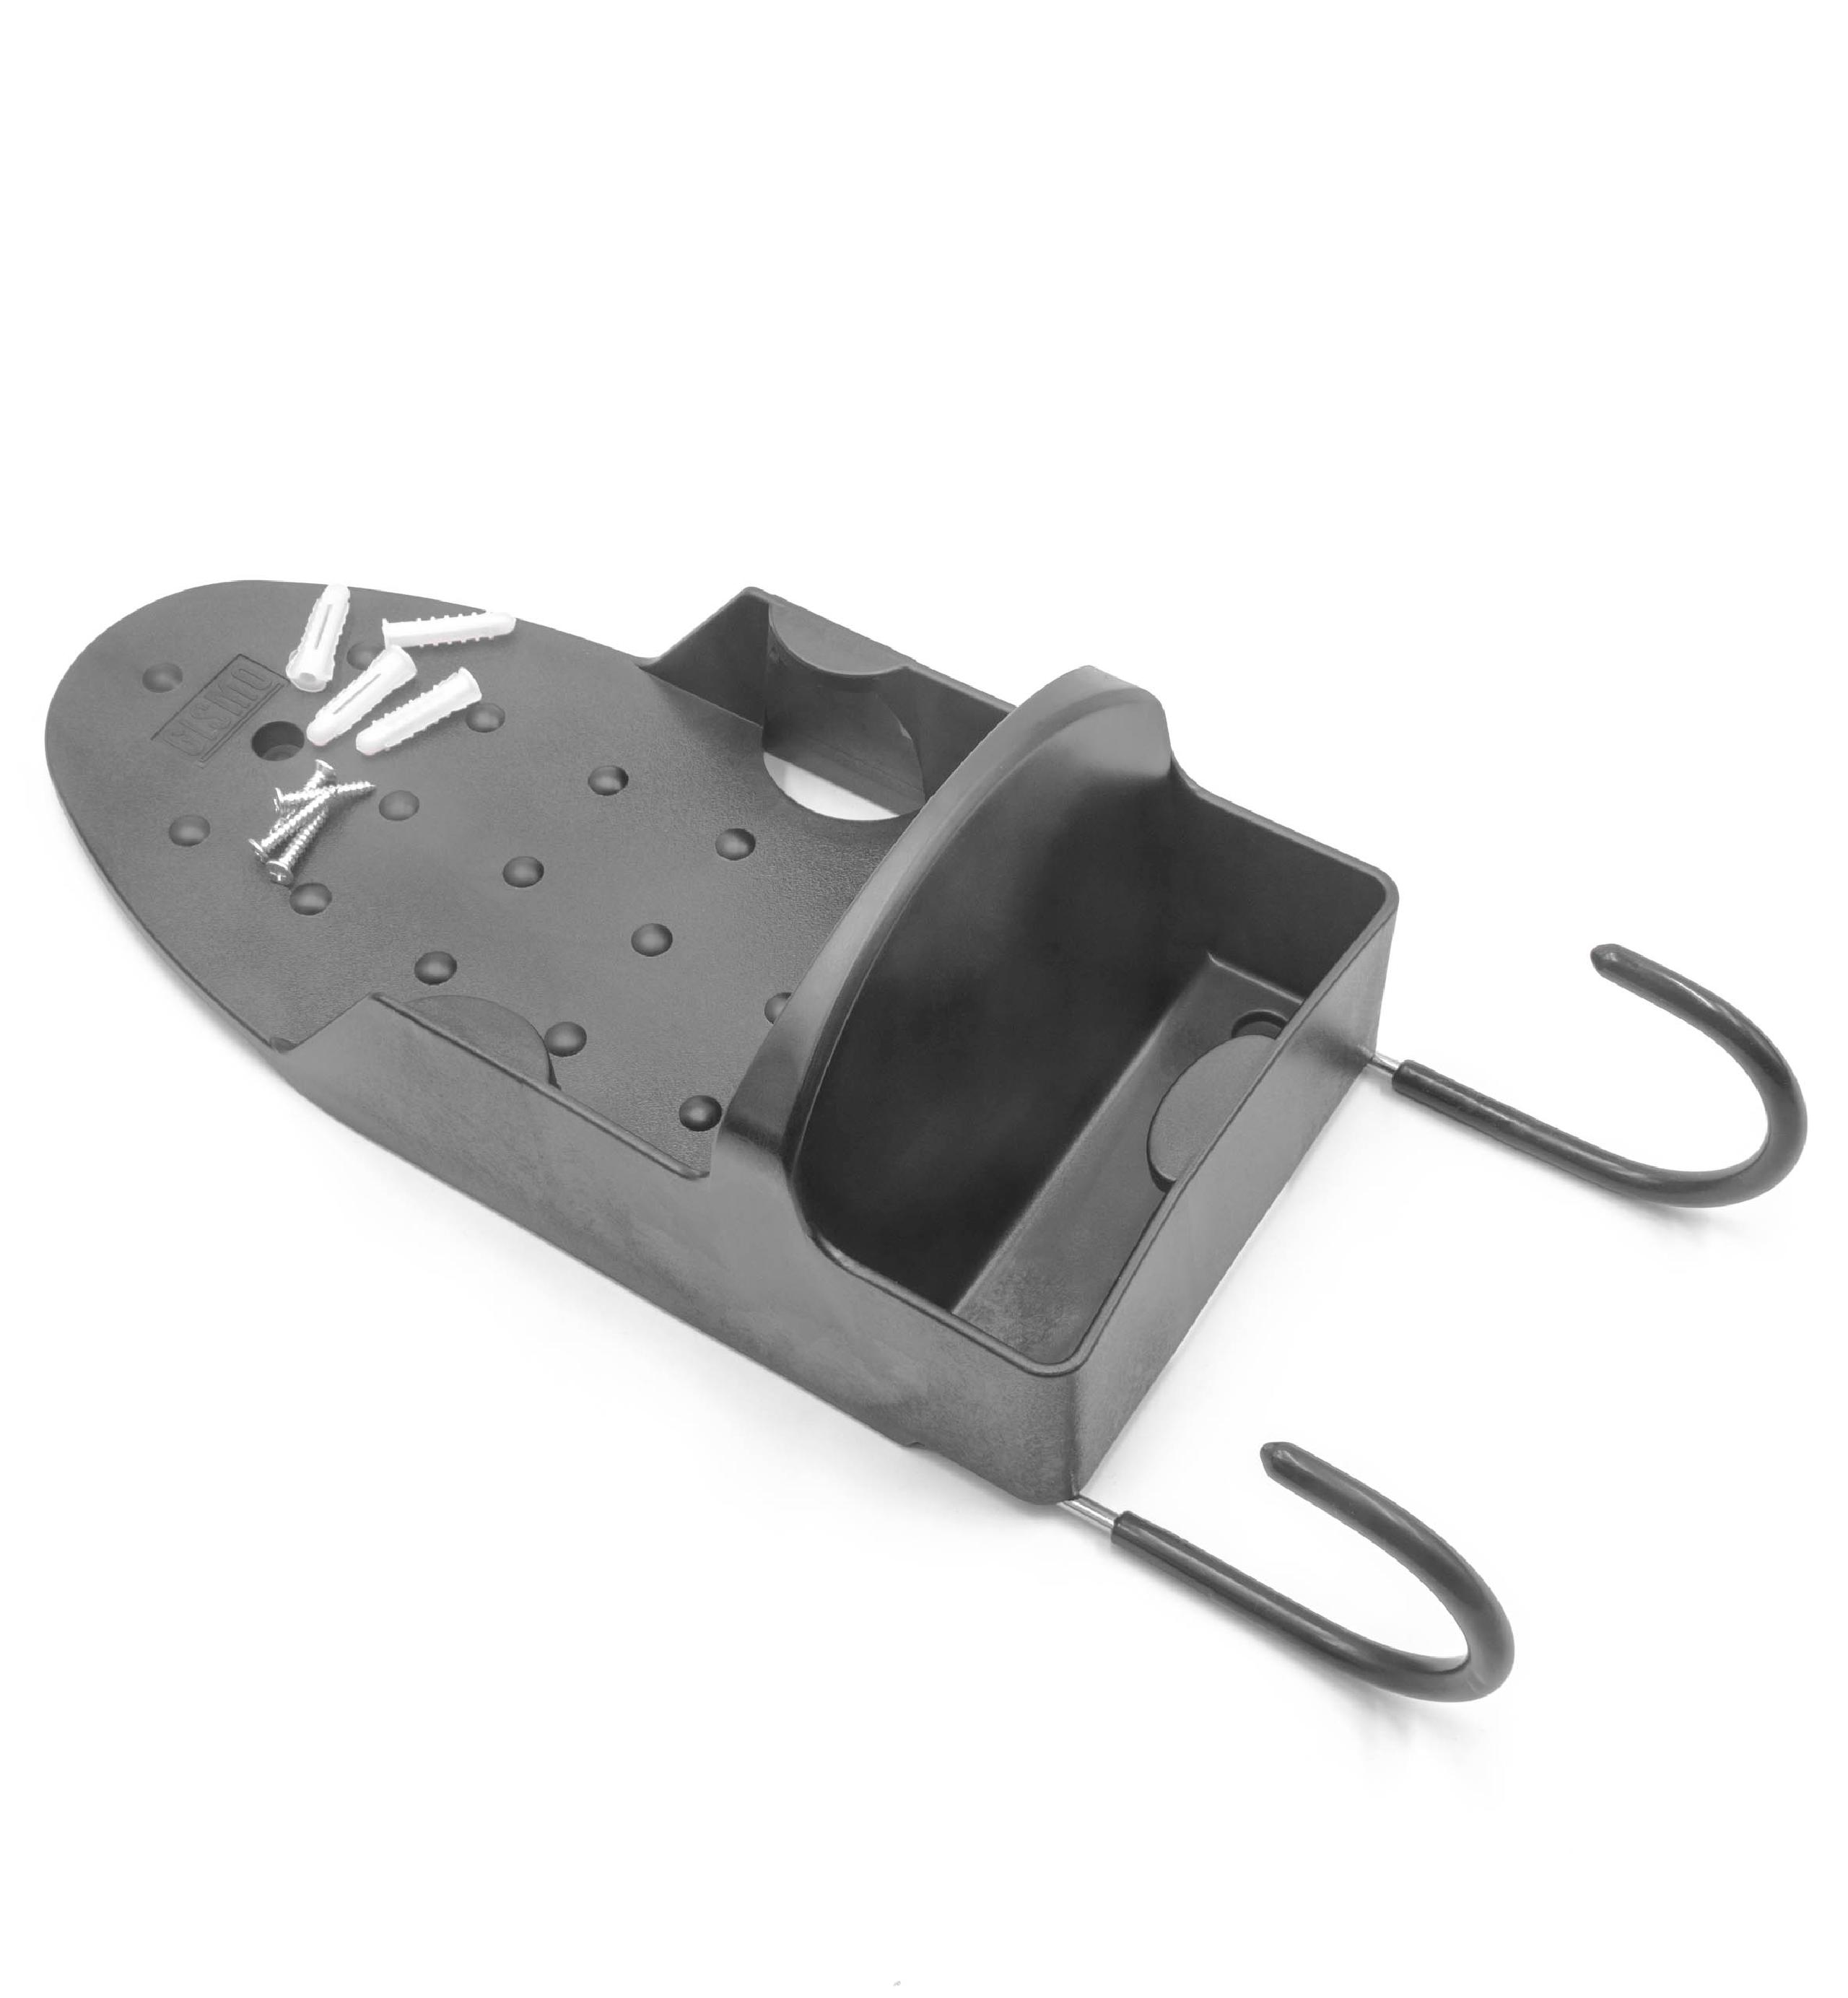 Steam Iron Holder suitable for Iron, Ironing Board - 11.5 x 22.5 x 9 cm, Black